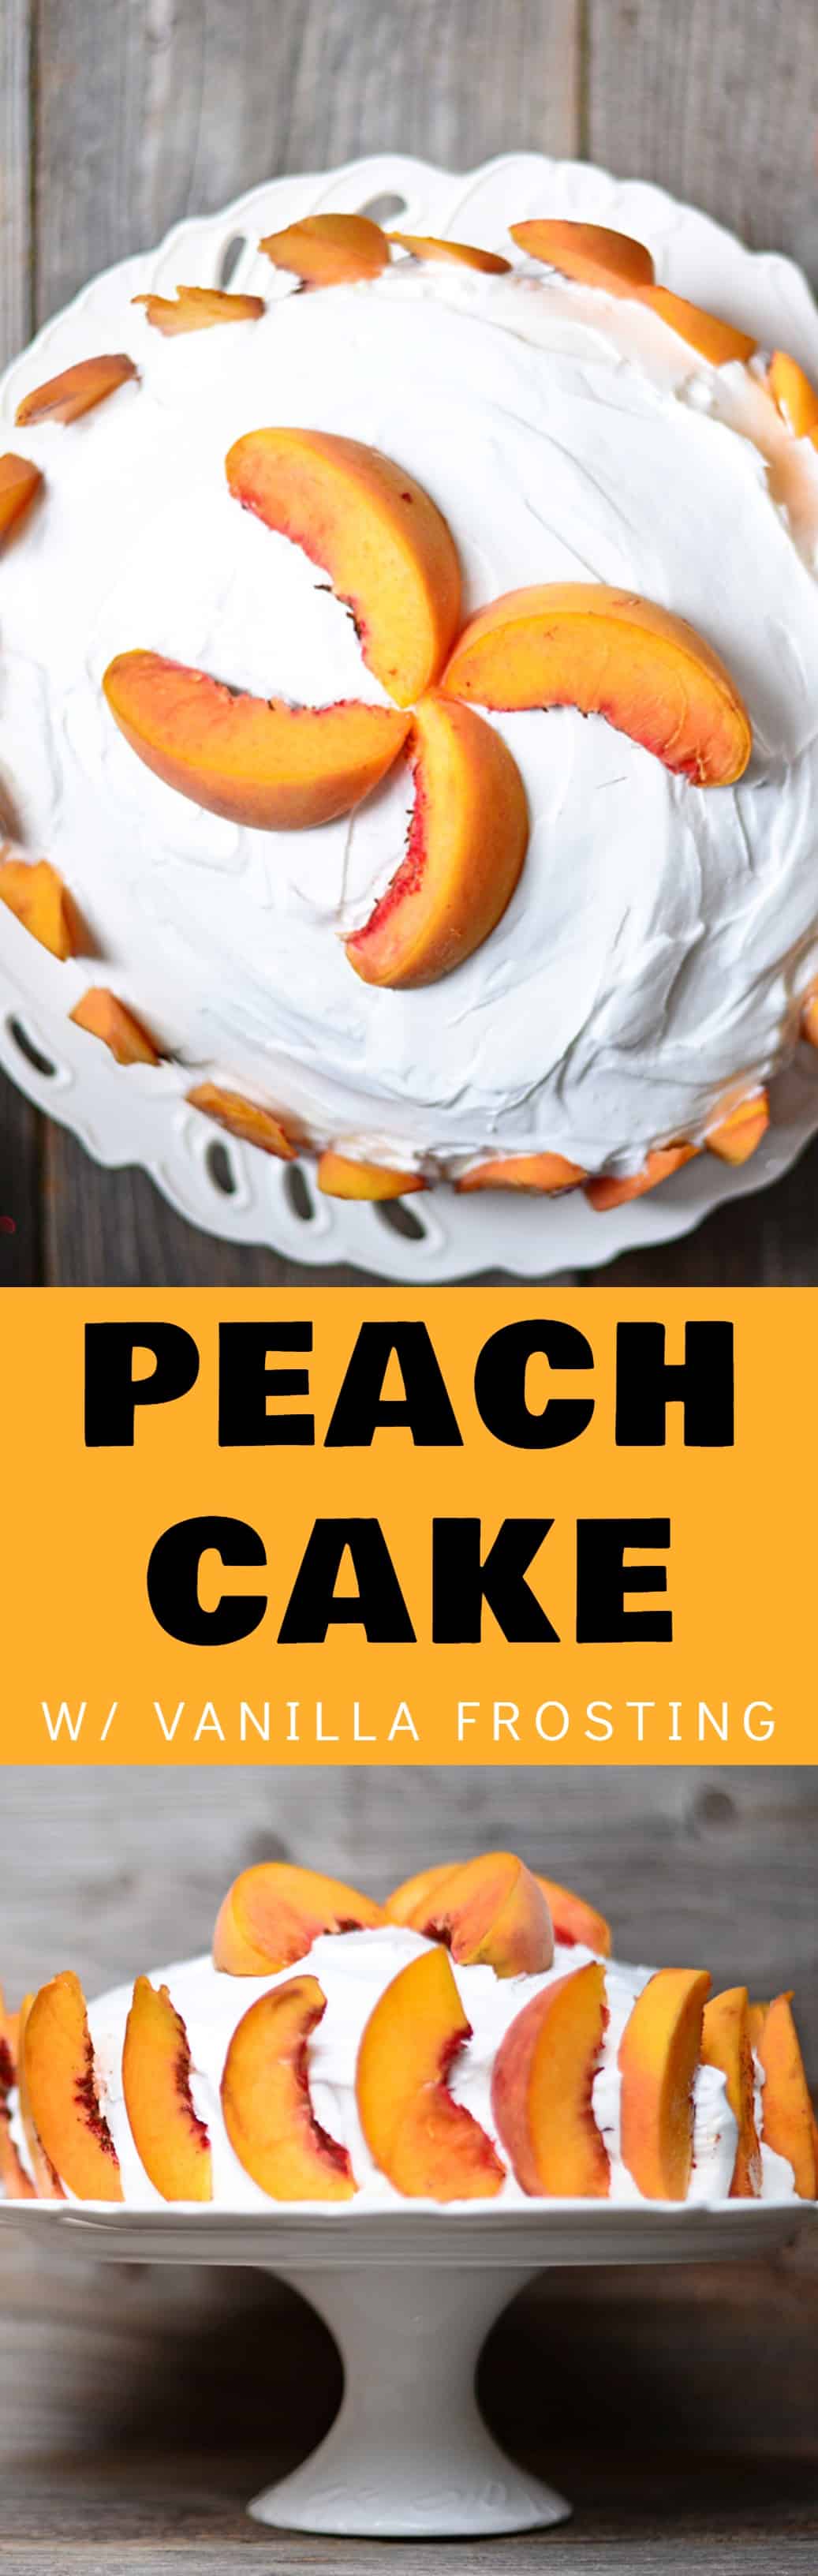 EASY to make Peach Cake with Vanilla Frosting recipe. The cake is so moist and made with fresh peaches inside and for decoration on top. This cake is made with two 8 inch cake pans layered together.  It's the perfect cake for Summer peach season!